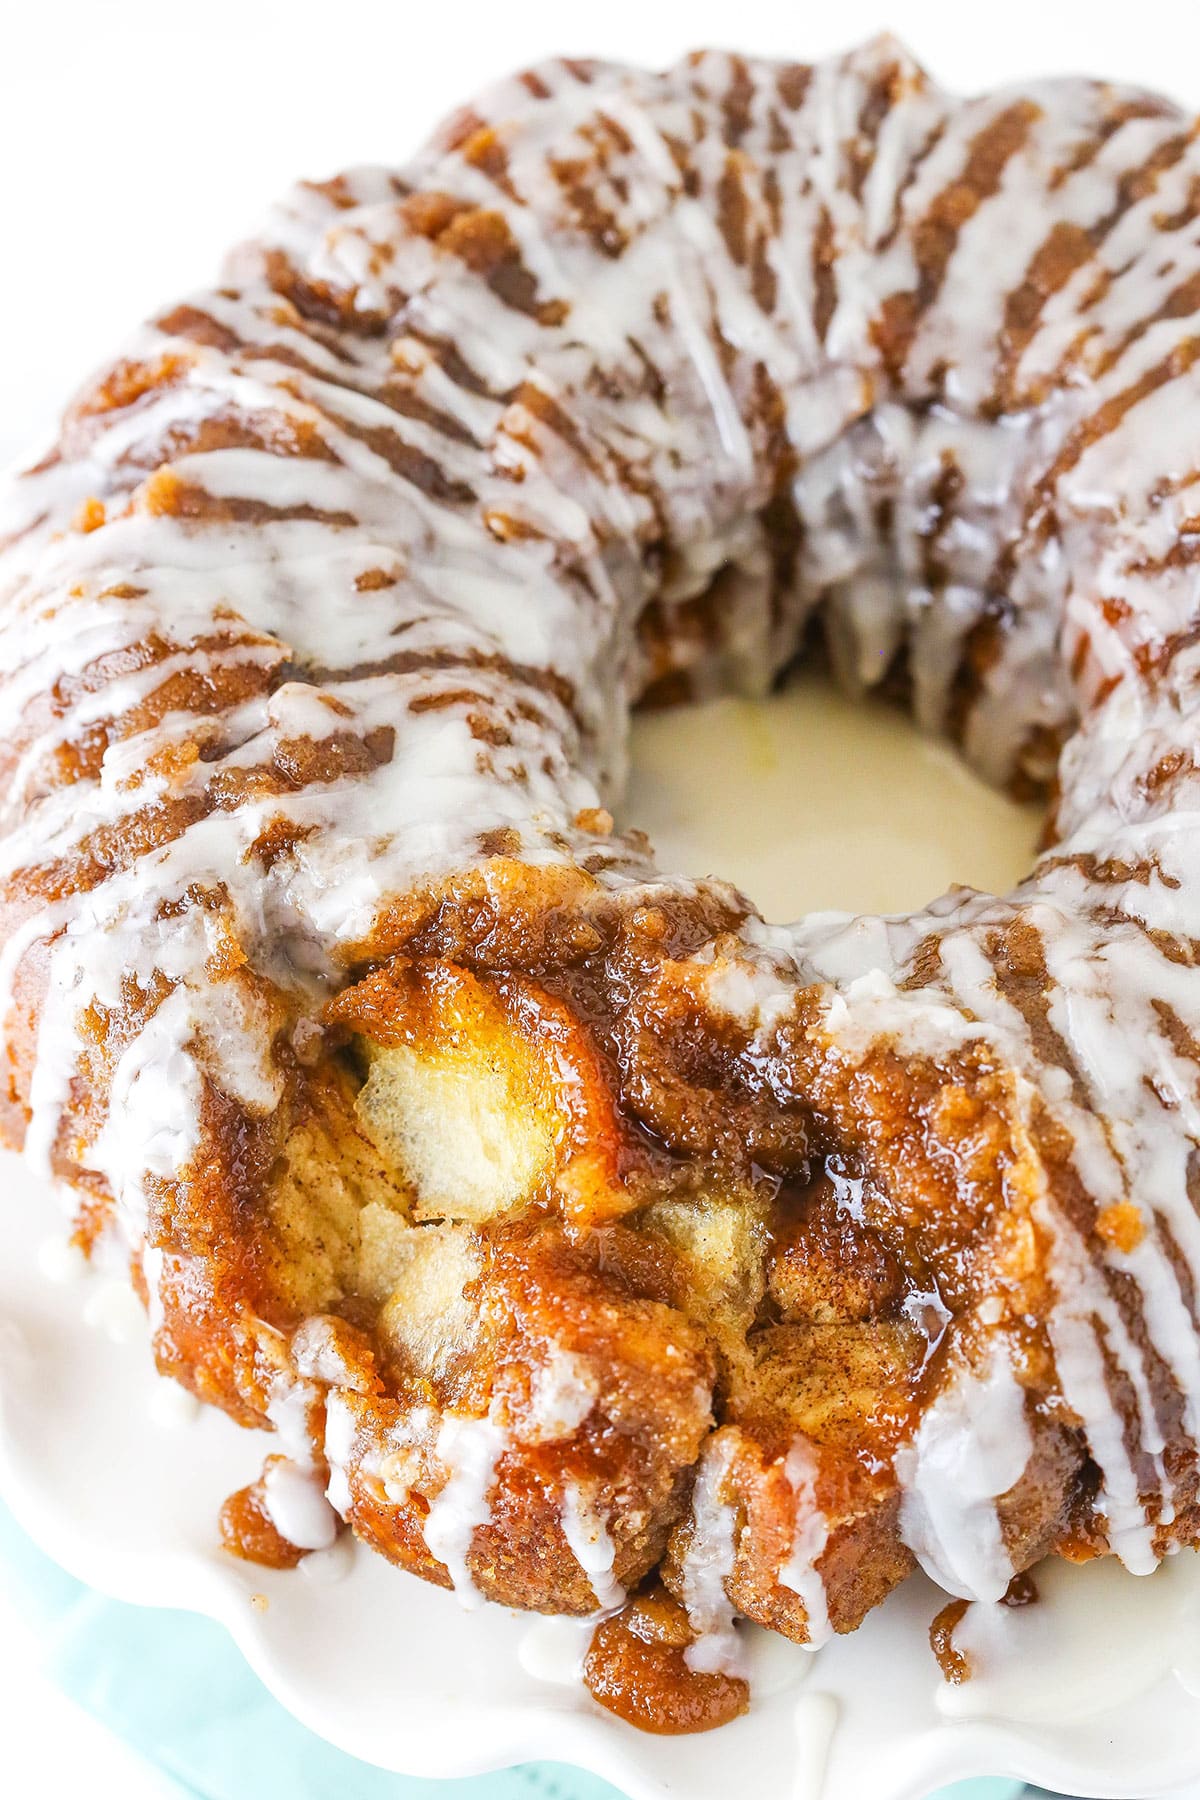 Overhead view of Monkey Bread with a glaze drizzle on a white plate.